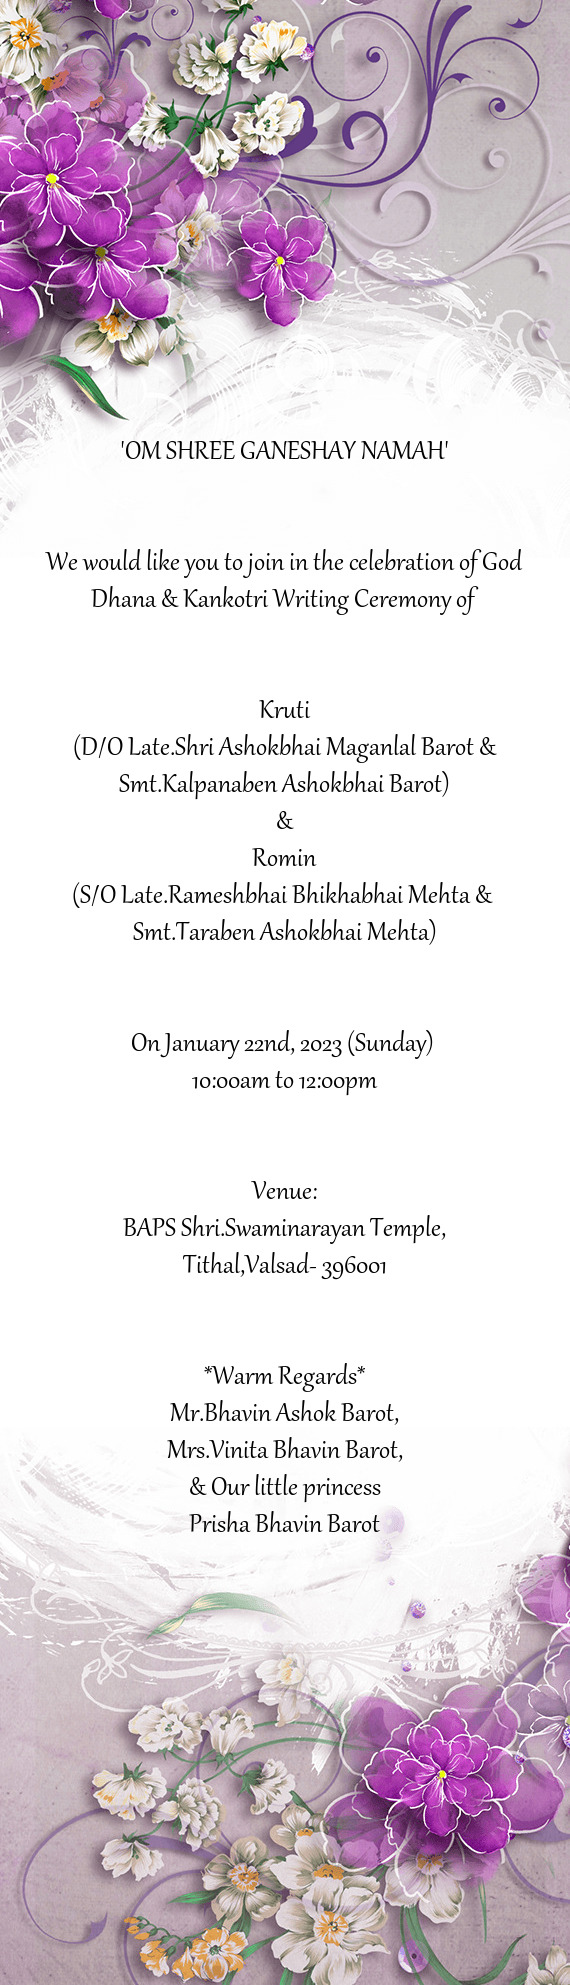 We would like you to join in the celebration of God Dhana & Kankotri Writing Ceremony of